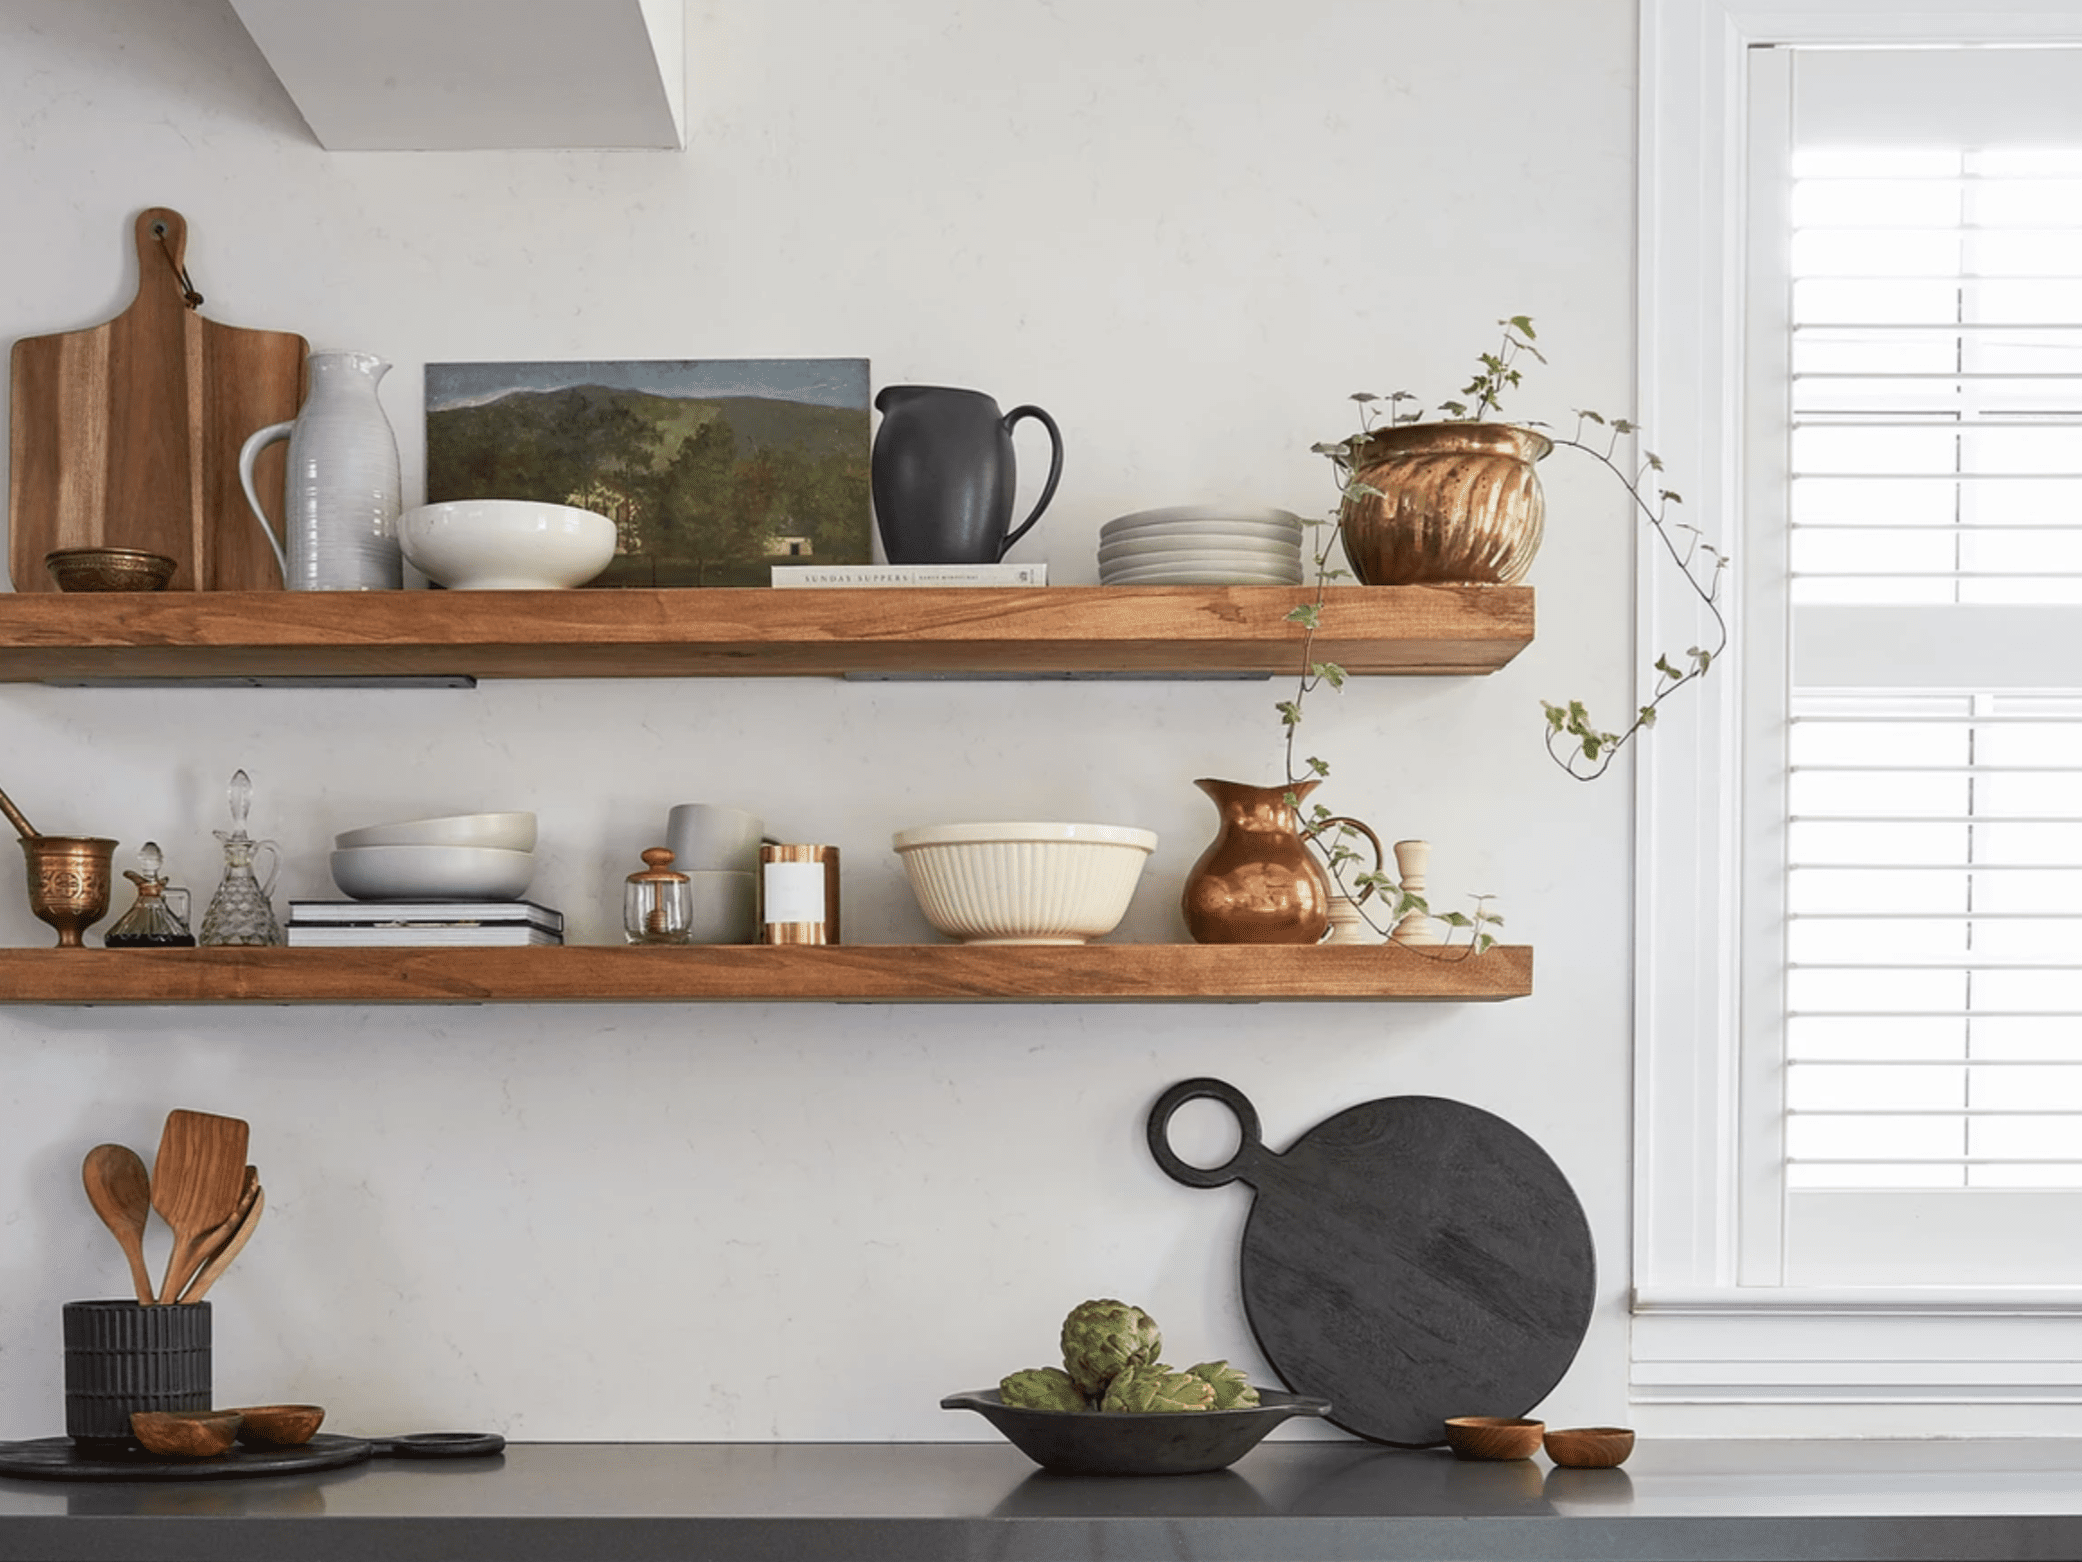 Stylish floating shelf ideas that add a sense of whimsy to any space